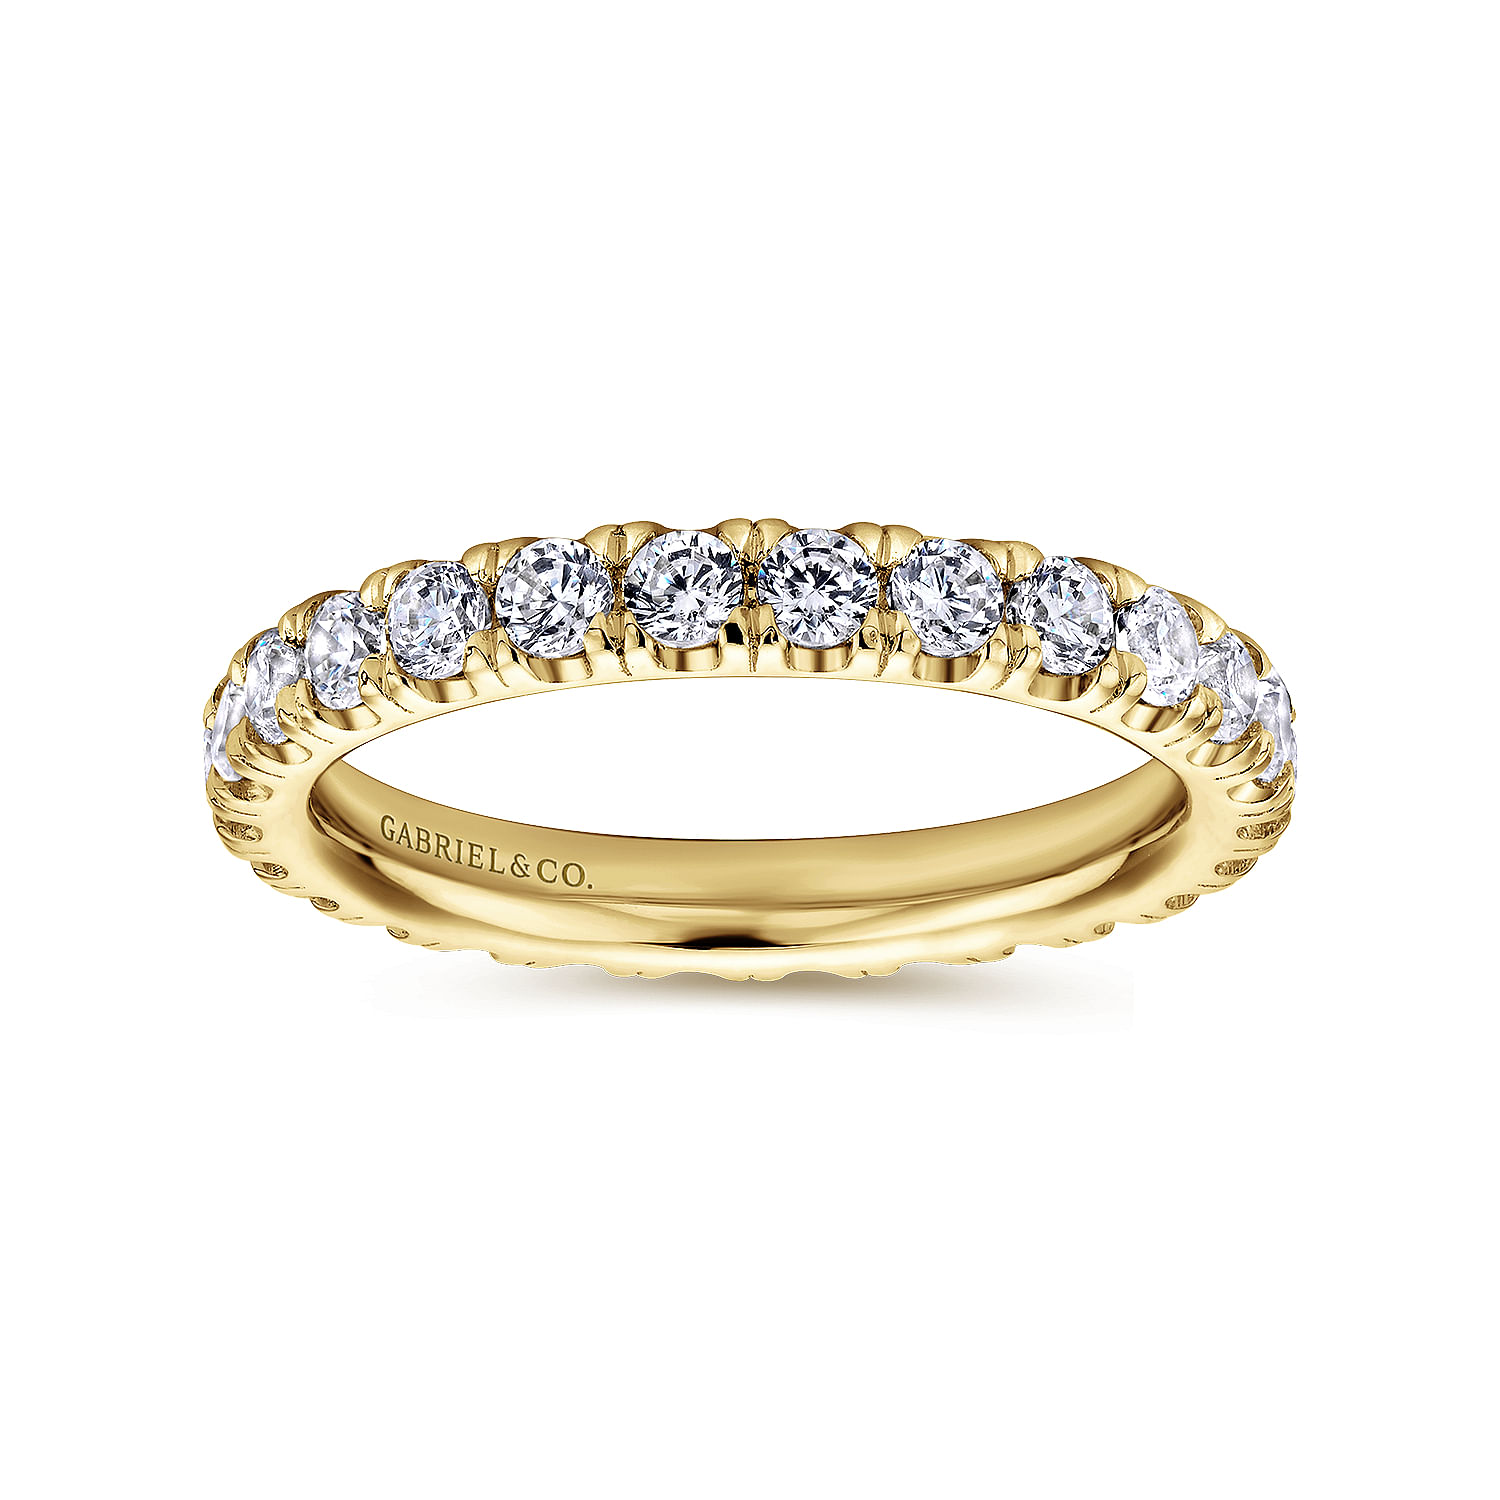 Avignon - French Pave  Eternity Diamond Ring in 14K Yellow Gold - 0.85 ct - Shot 4